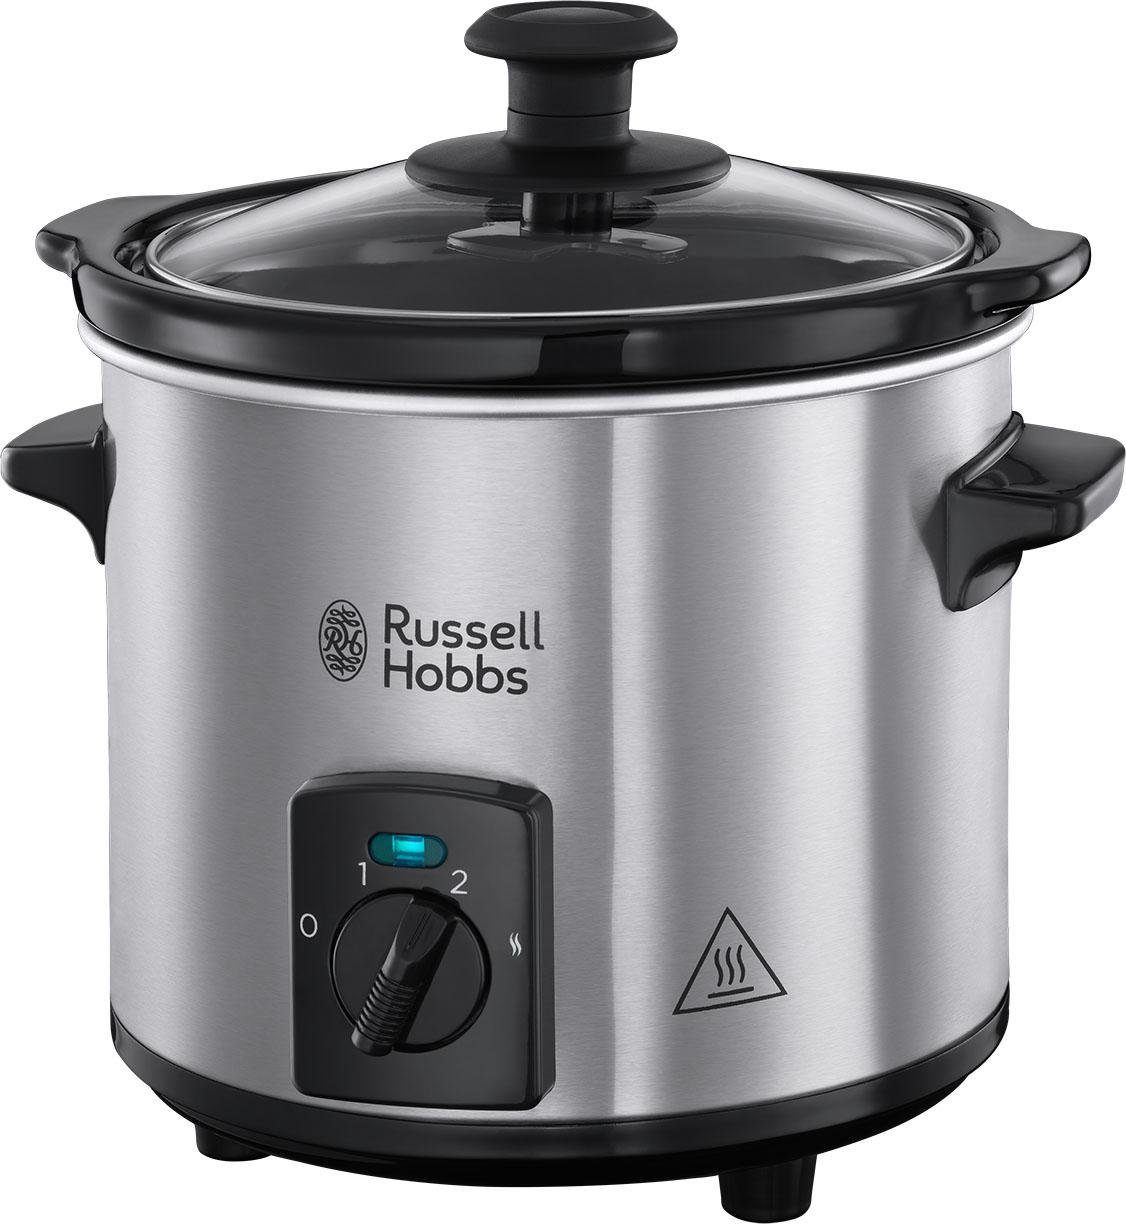 RUSSELL HOBBS Dampfgarer Compact Home Mini 25570-56, 2 l